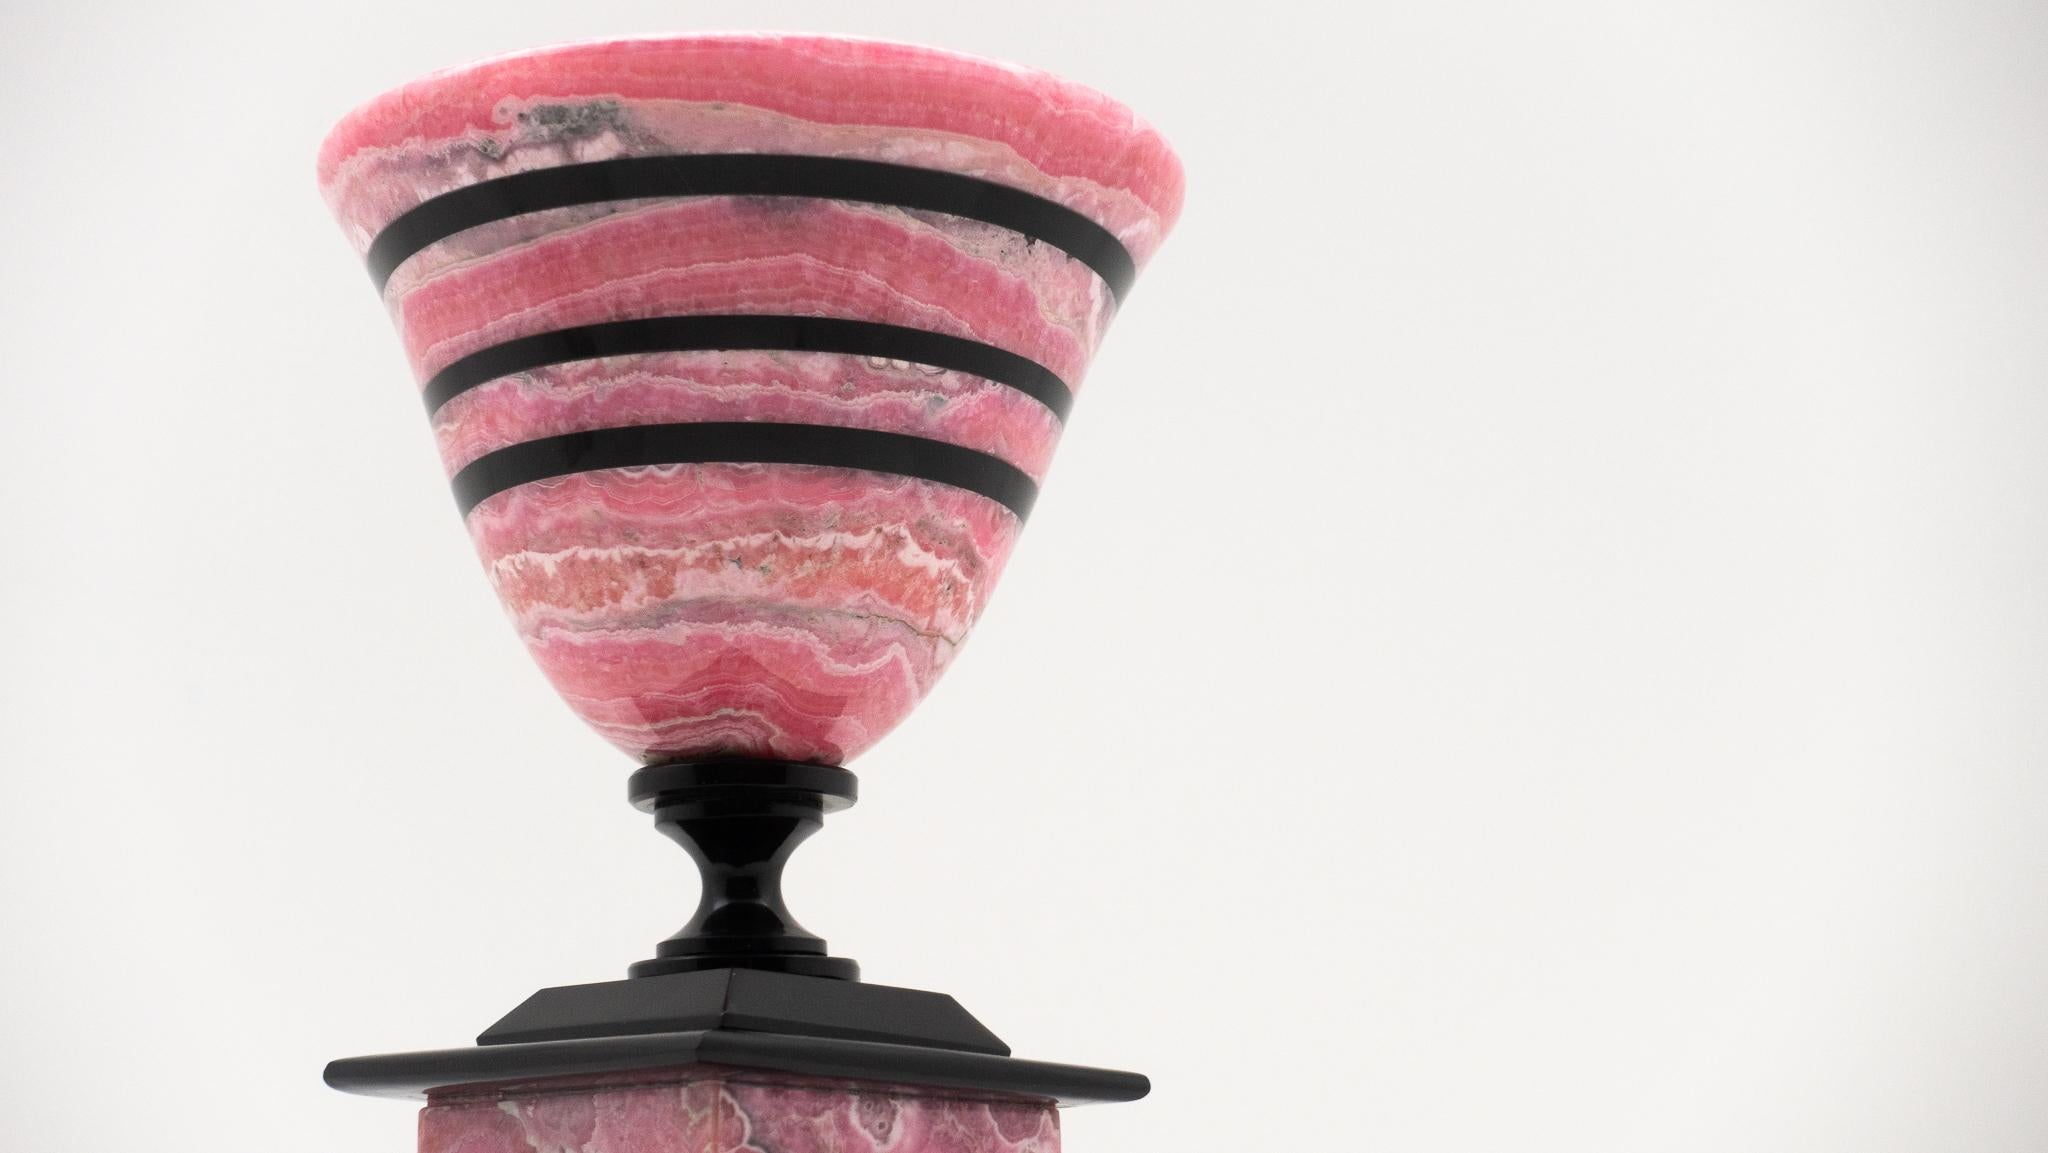 Rhodochrosite chalice with black obsidian bands on the bowl, stem, and foot. Rhodochrosite is found mostly in Argentina and is the national stone of that country. Rhodochrosite properties are know for helping in matters of love and strength... Just